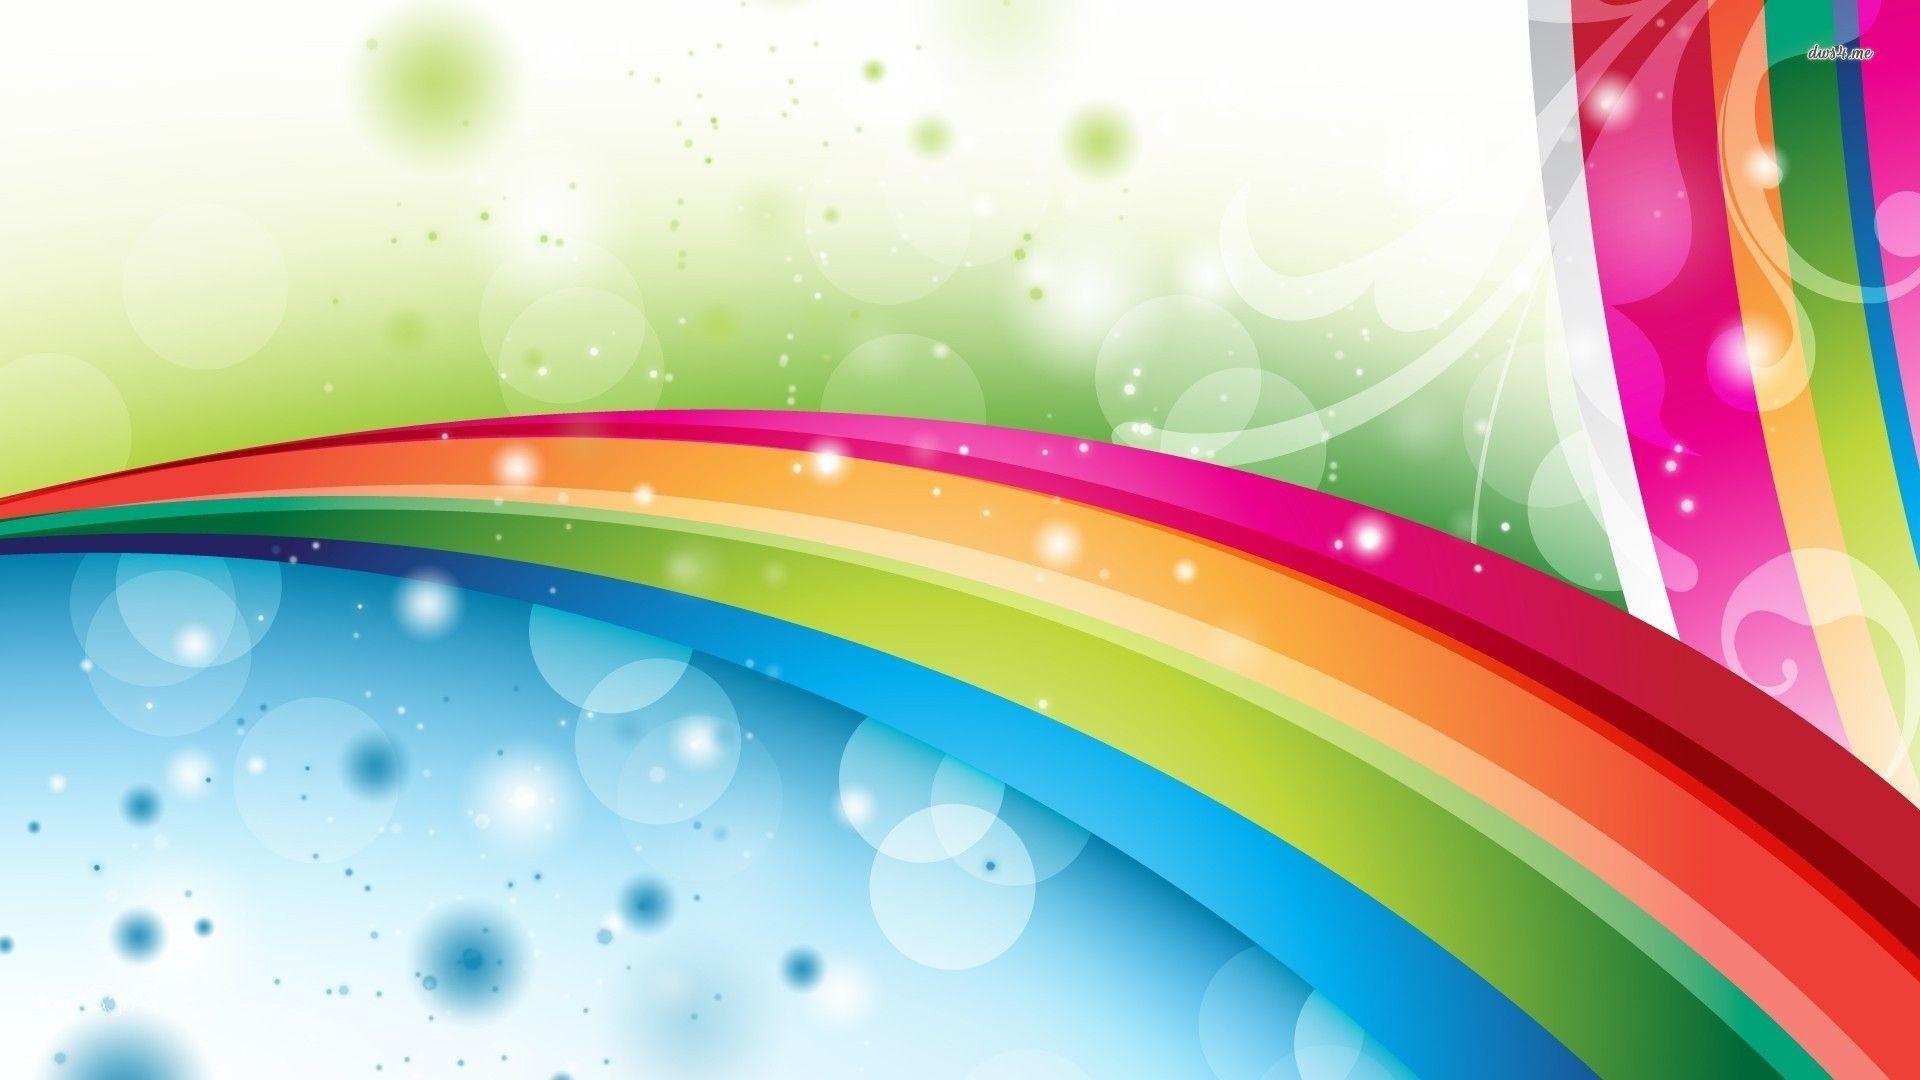 Rainbow Colors Desktop Backgrounds with image resolution 1920x1080 pixel. You can make this wallpaper for your Desktop Computer Backgrounds, Mac Wallpapers, Android Lock screen or iPhone Screensavers